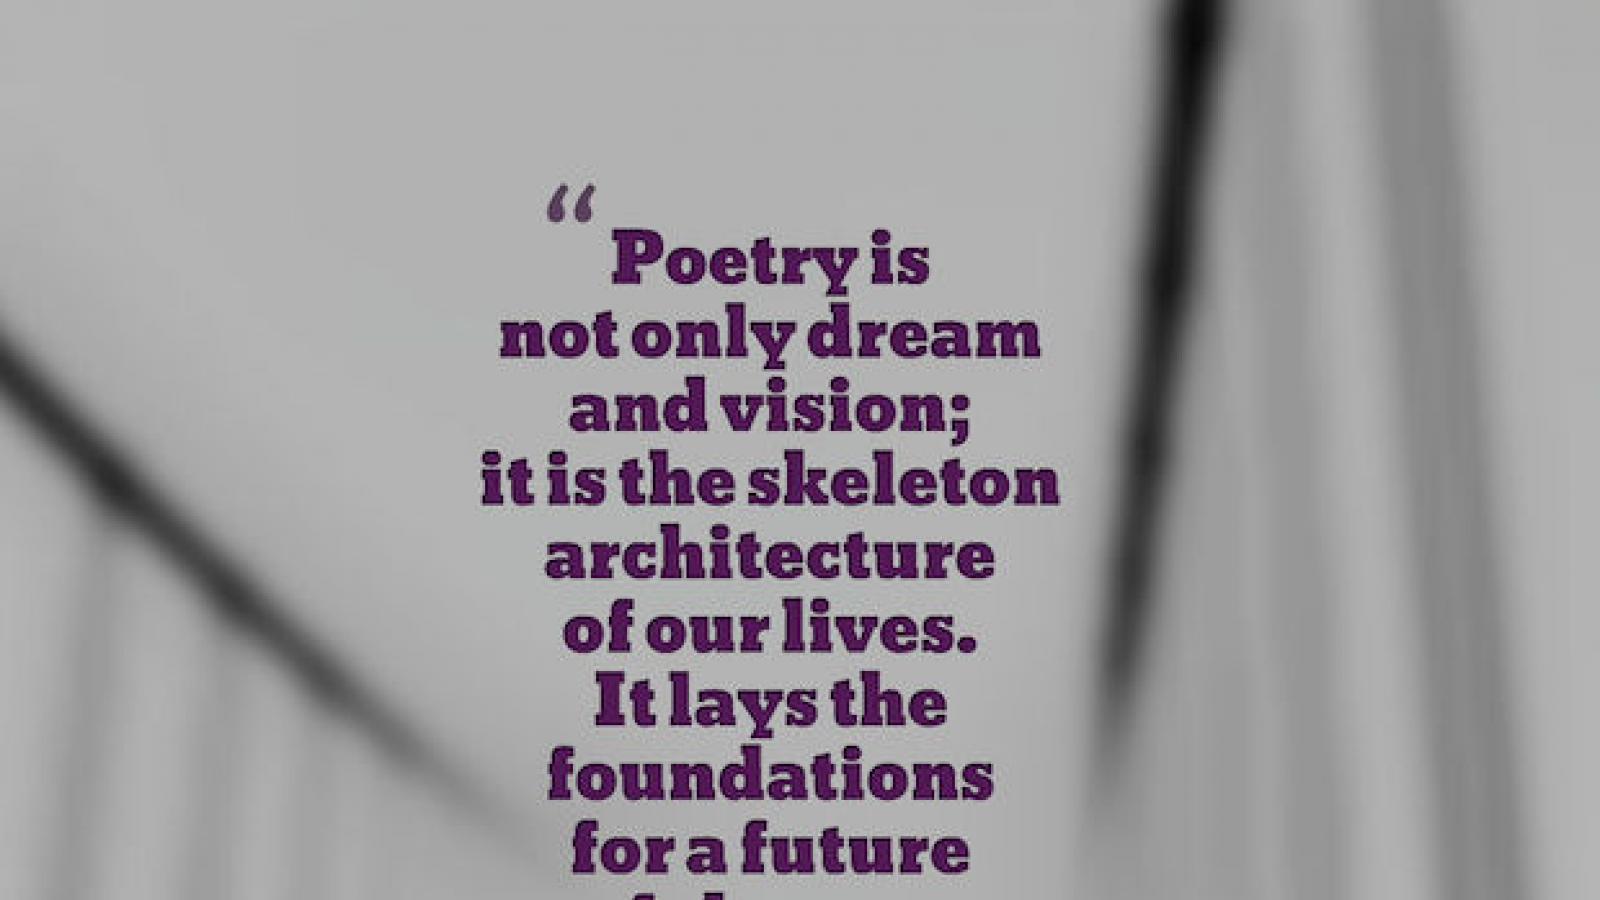 Poetry is not only dream and vision; it is the skeleton architecture of our lives. It lays the foundations for a future of change, a bridge across our fears of what has never been before. Audre Lorde